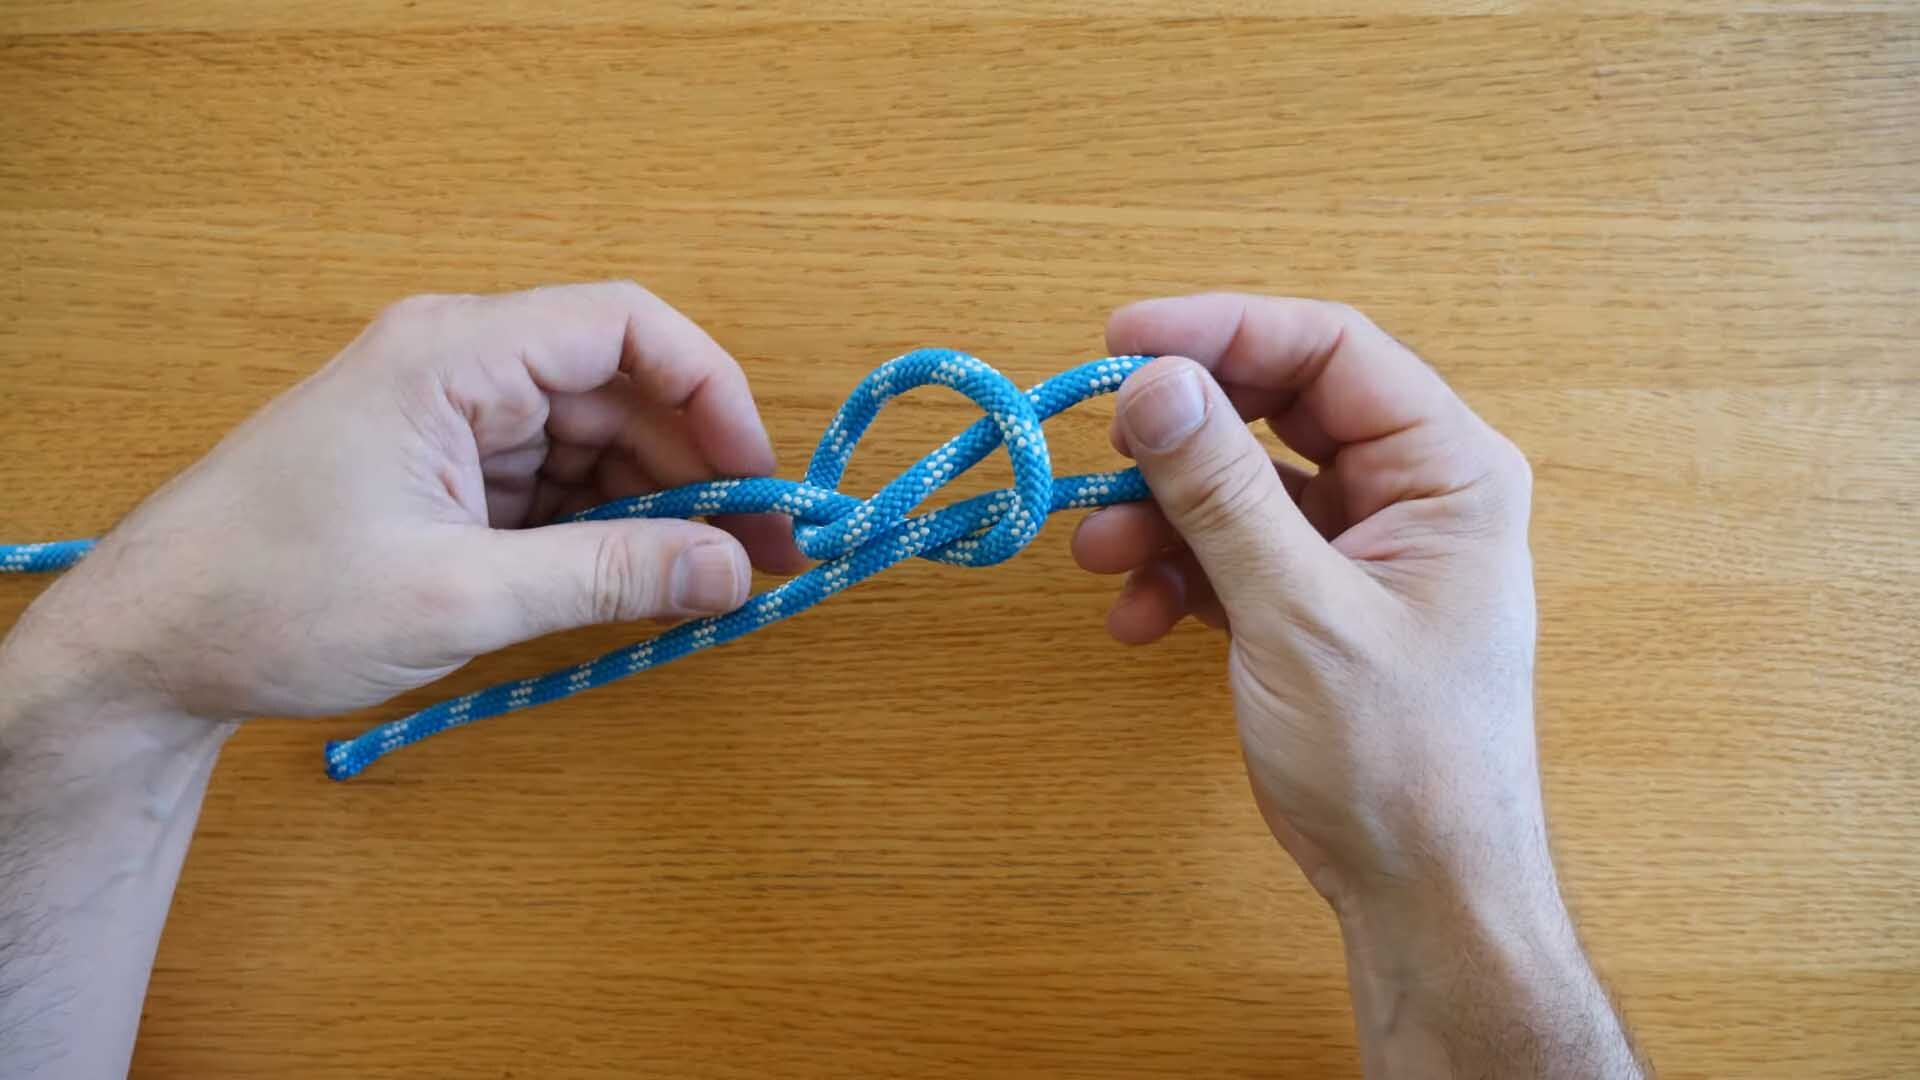 Demonstration on tying a slip knot using a blue rope.